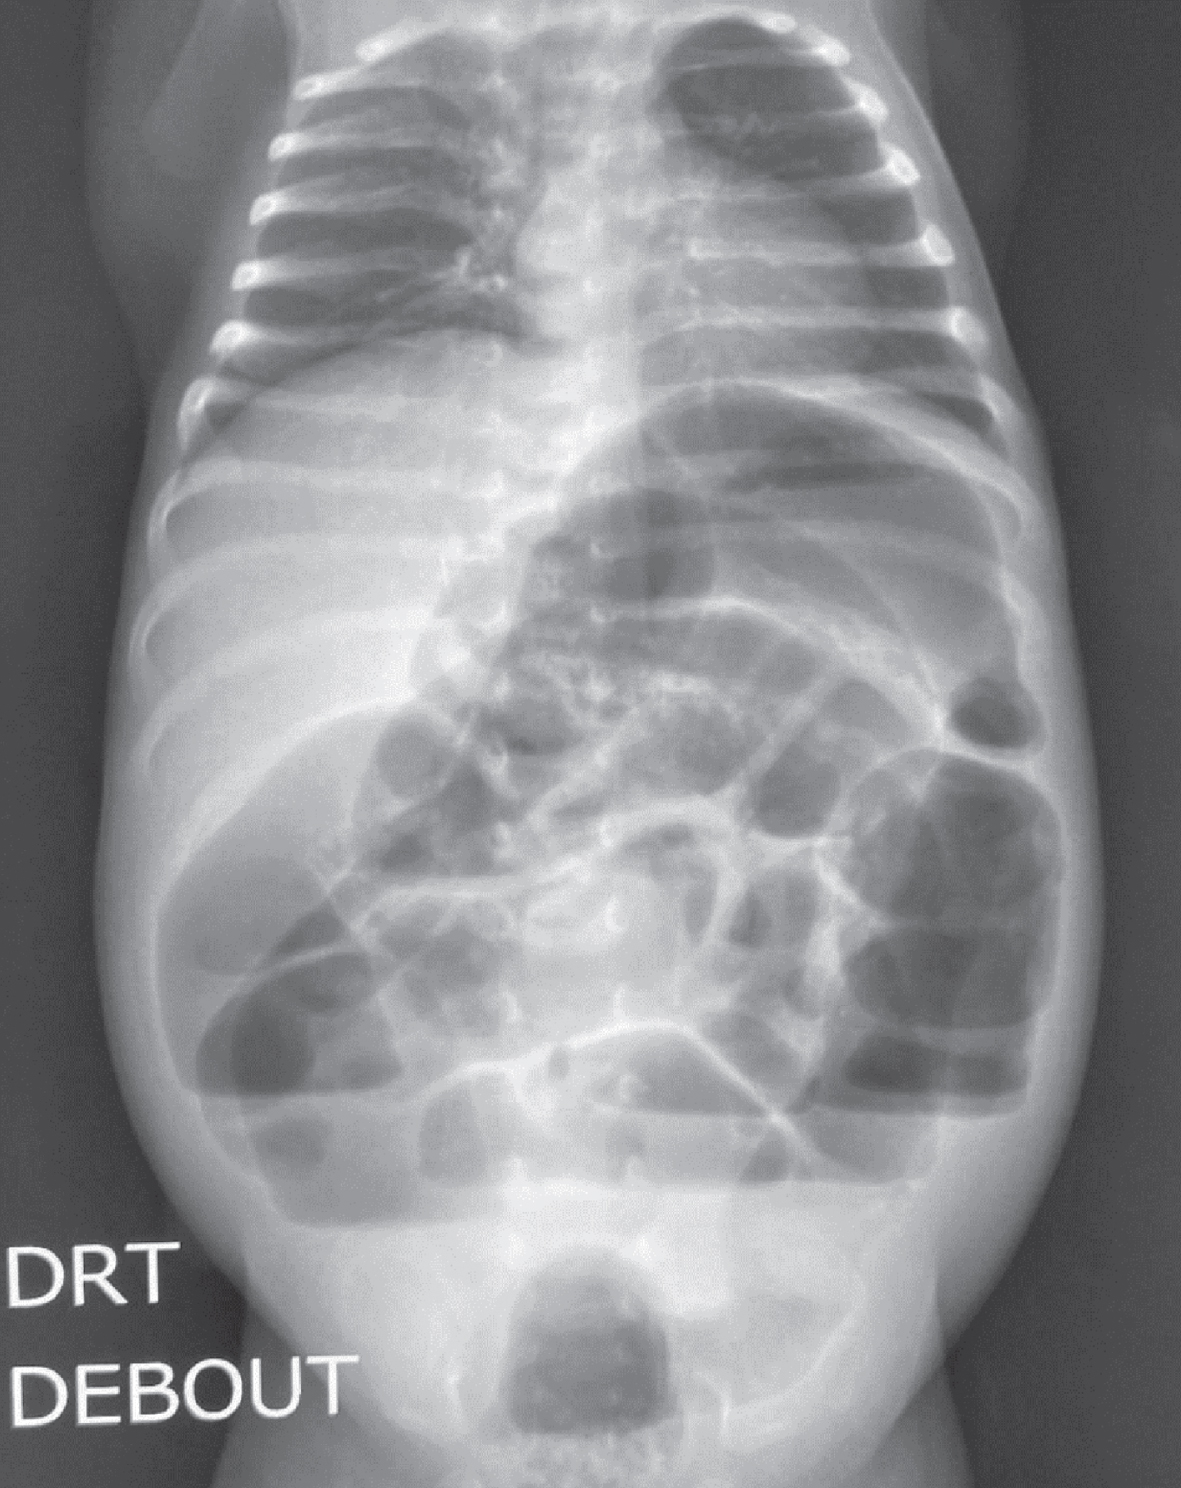 Abdominal radiograph showing distended bowels with air-fluid levels and thickened intestine wall and PI. PI: pneumatosis intestinalis.